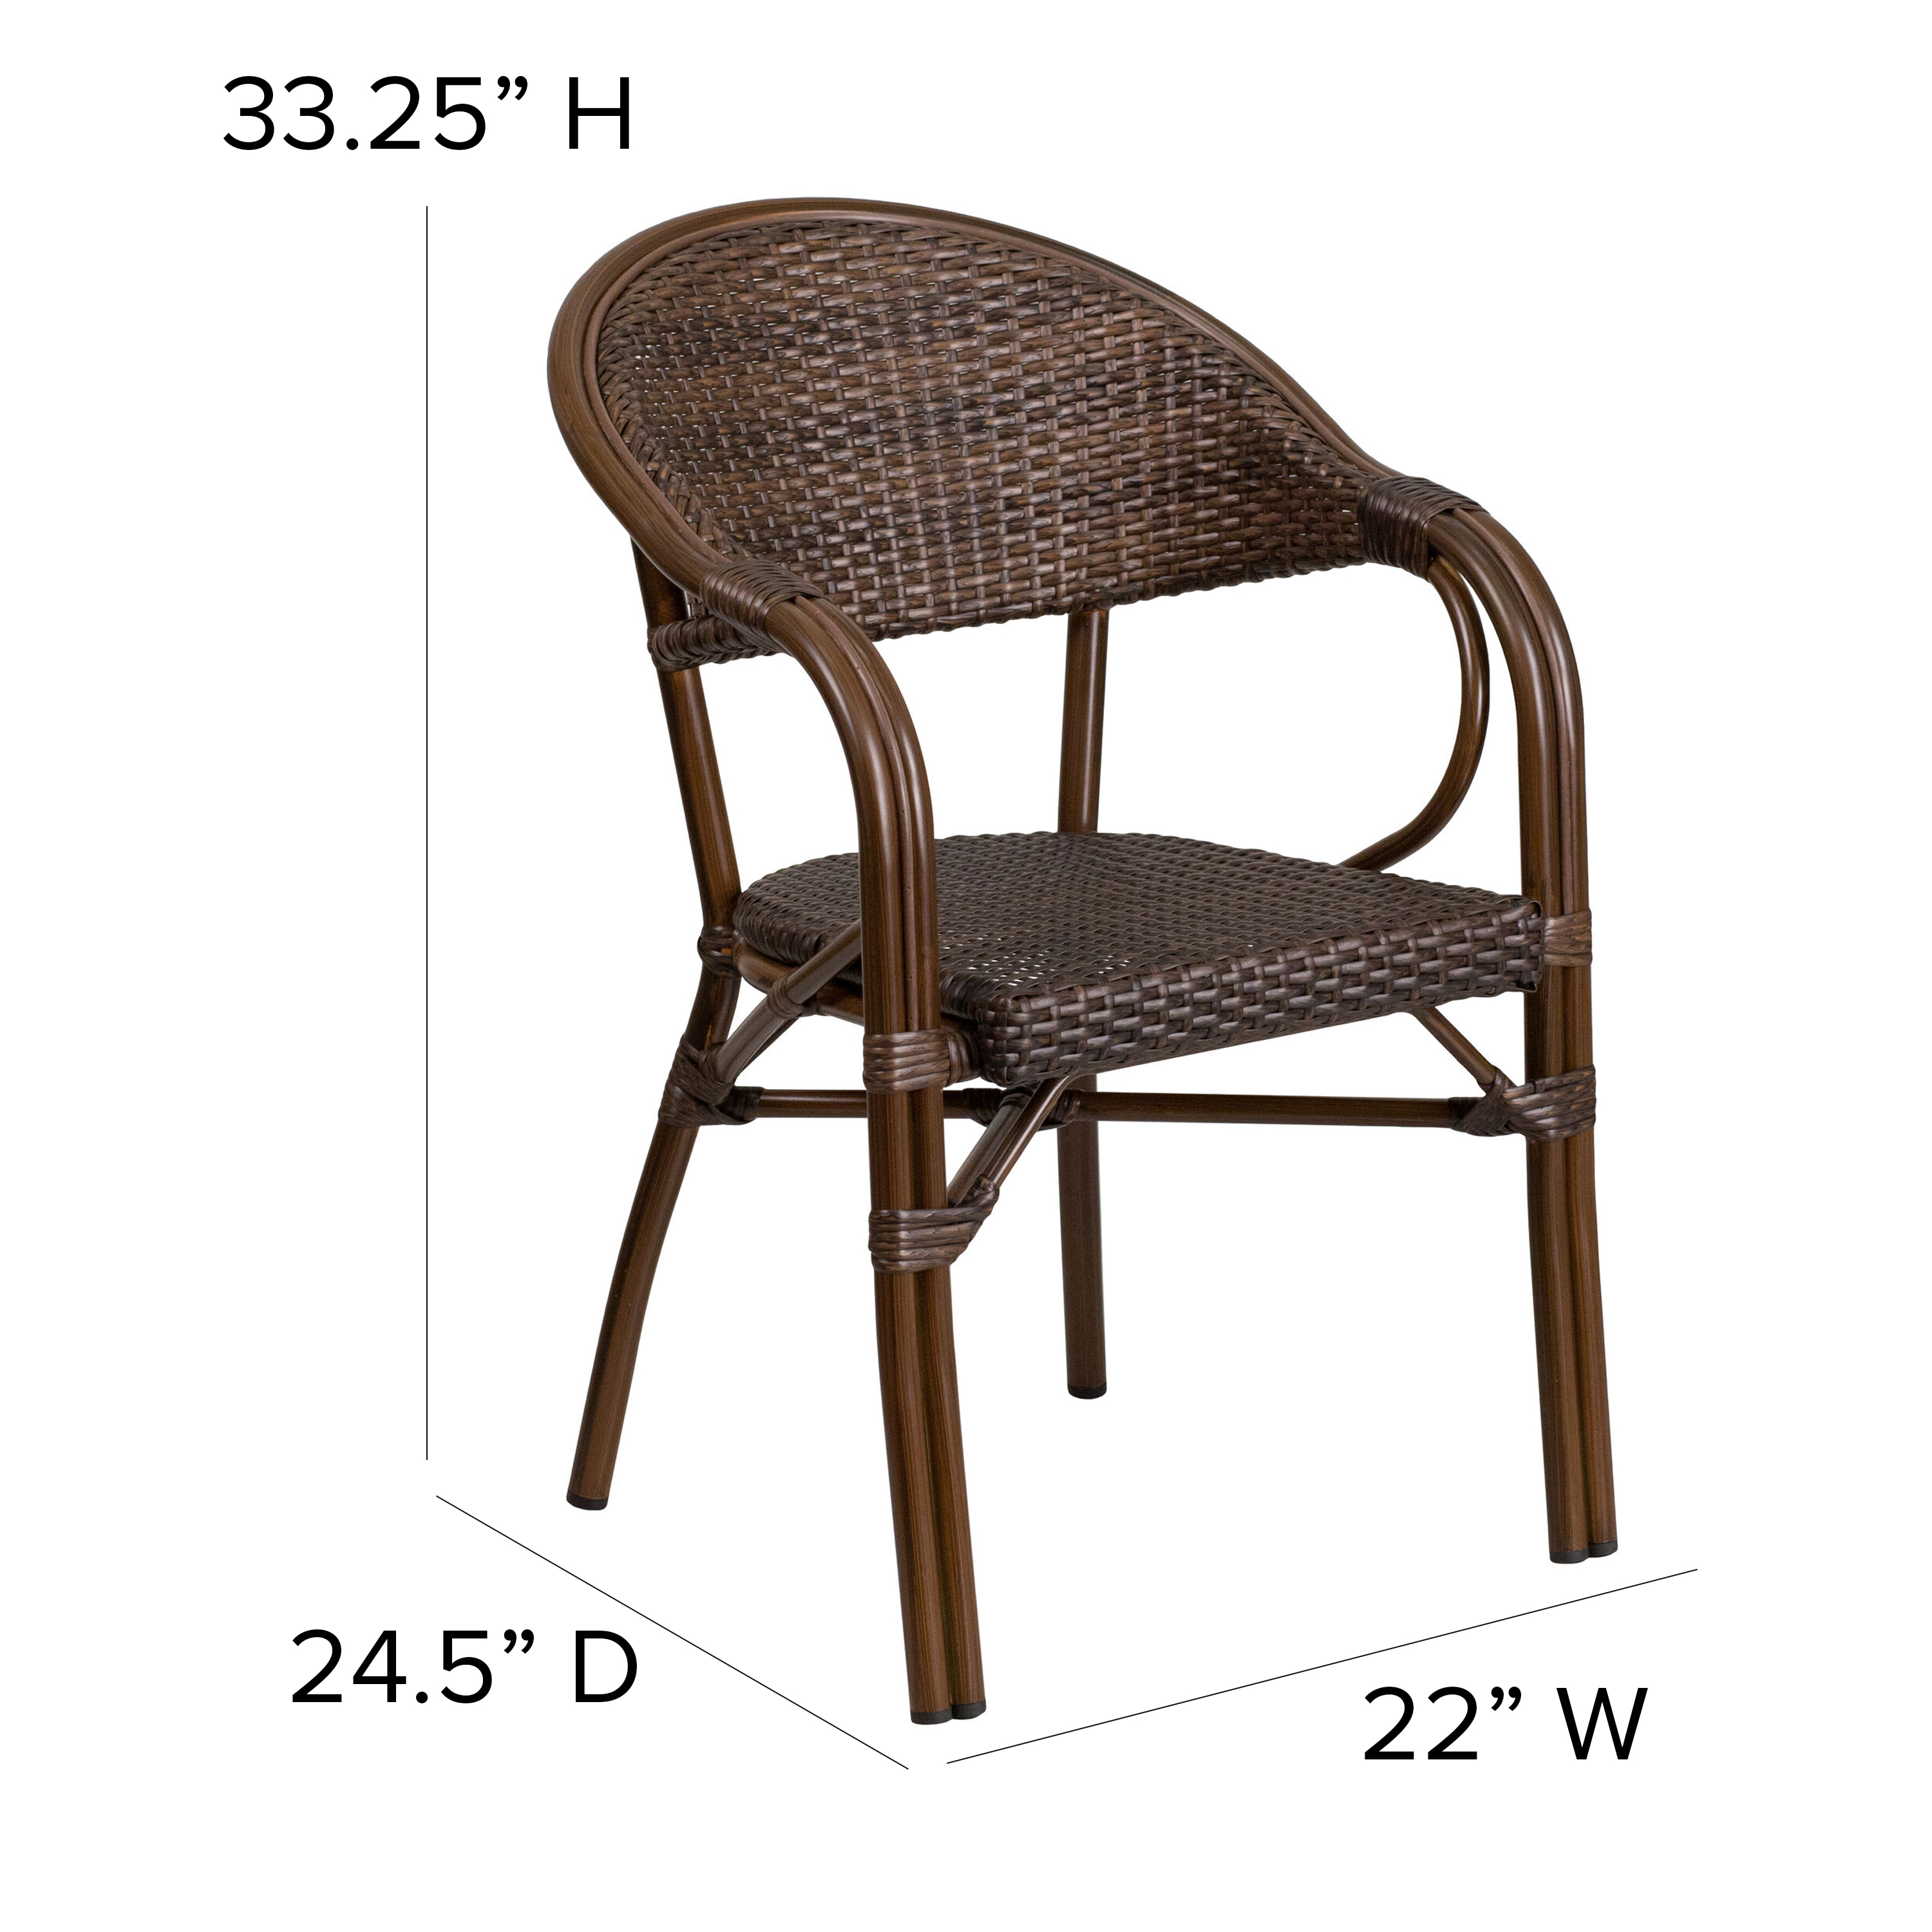 Flash Furniture Milano Series Cocoa Rattan Restaurant Patio Chair with Bamboo-Aluminum Frame - image 5 of 11